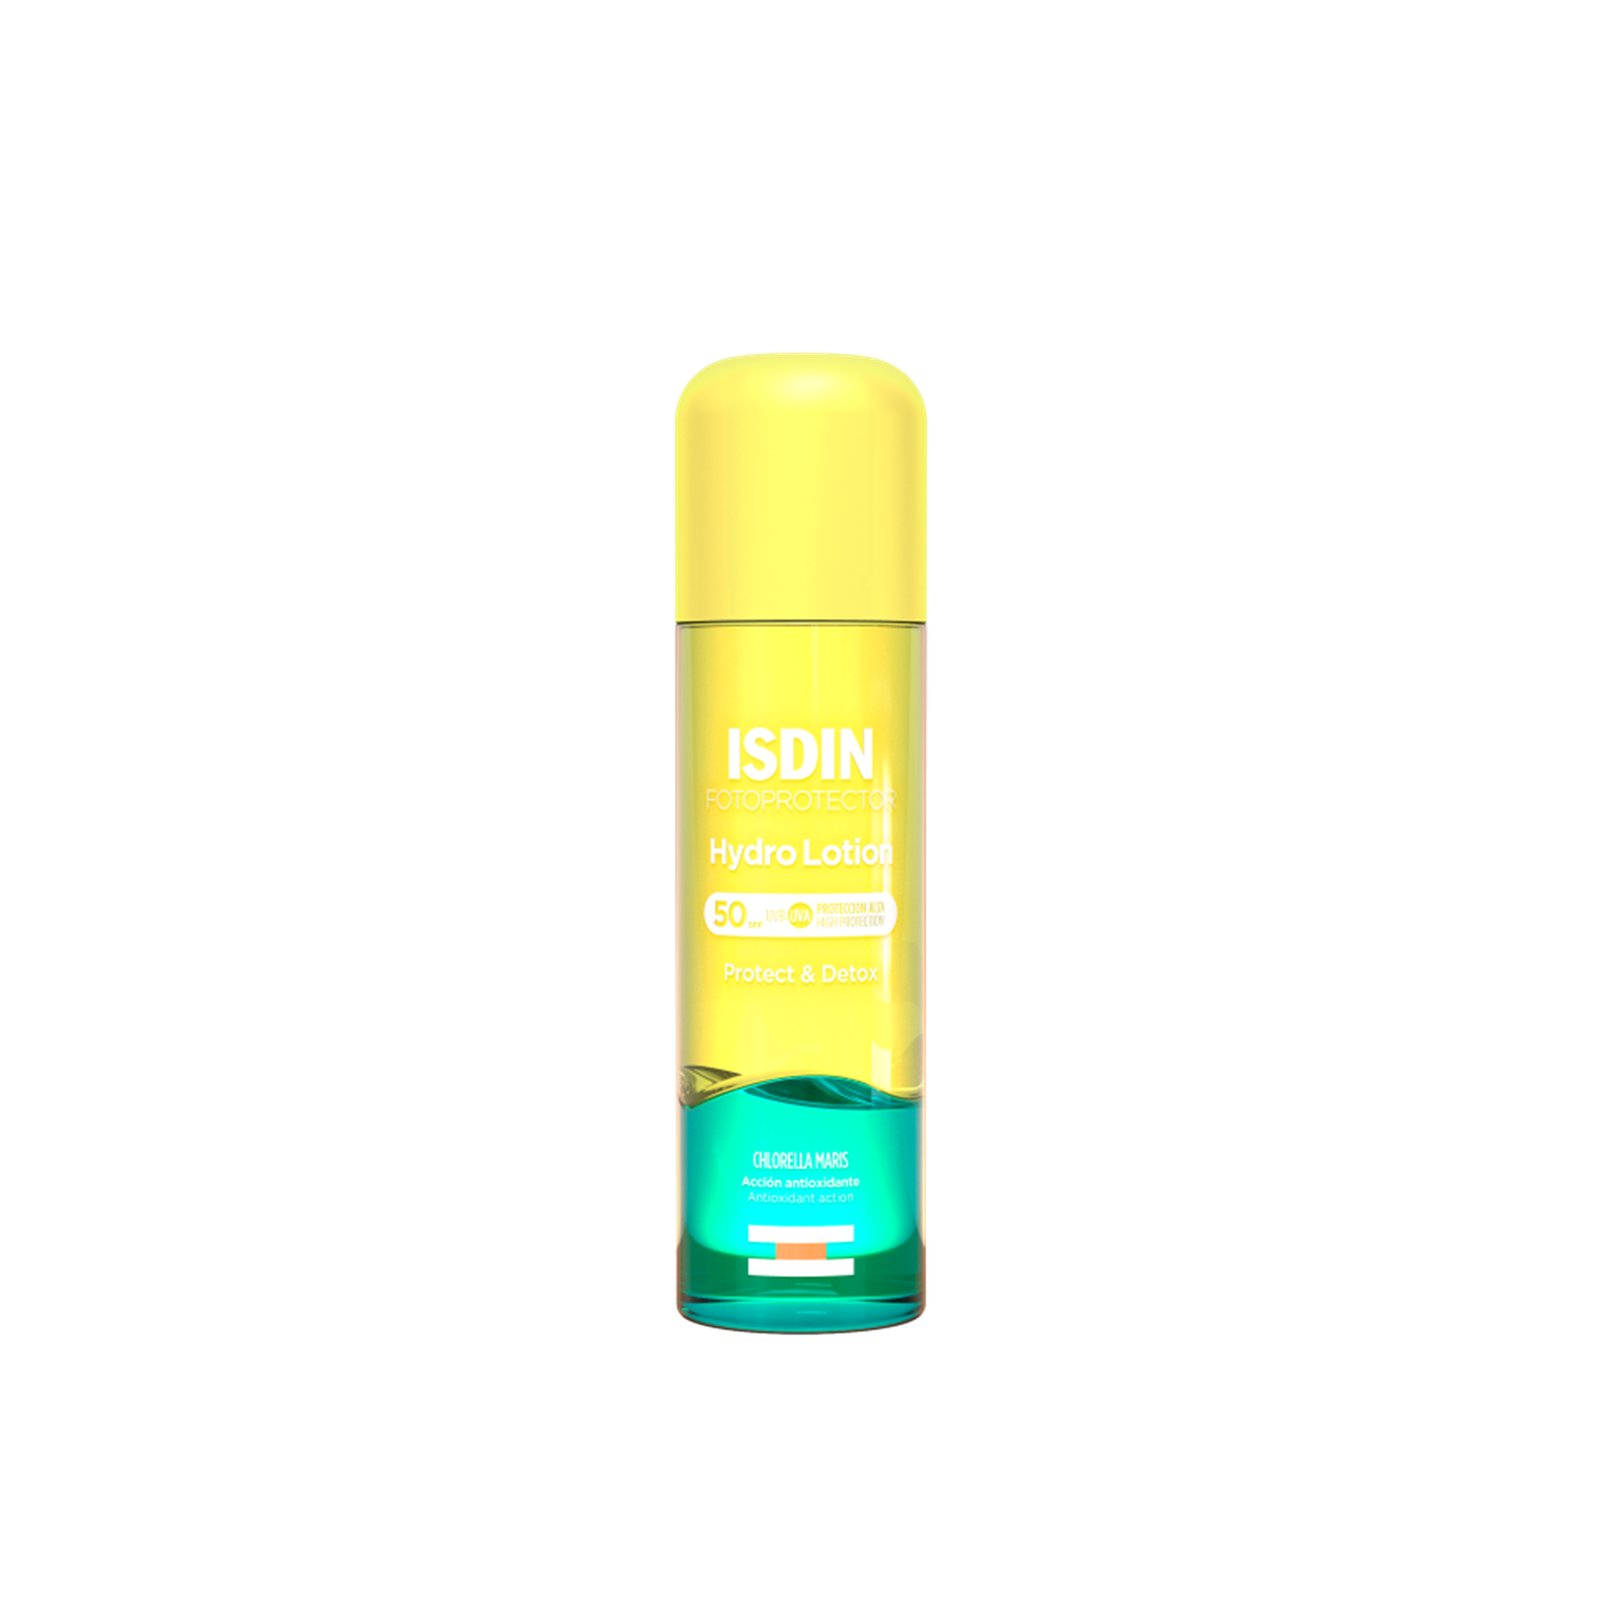 ISDIN Fotoprotector Hydro Lotion Protect & Detox SPF50 200ml